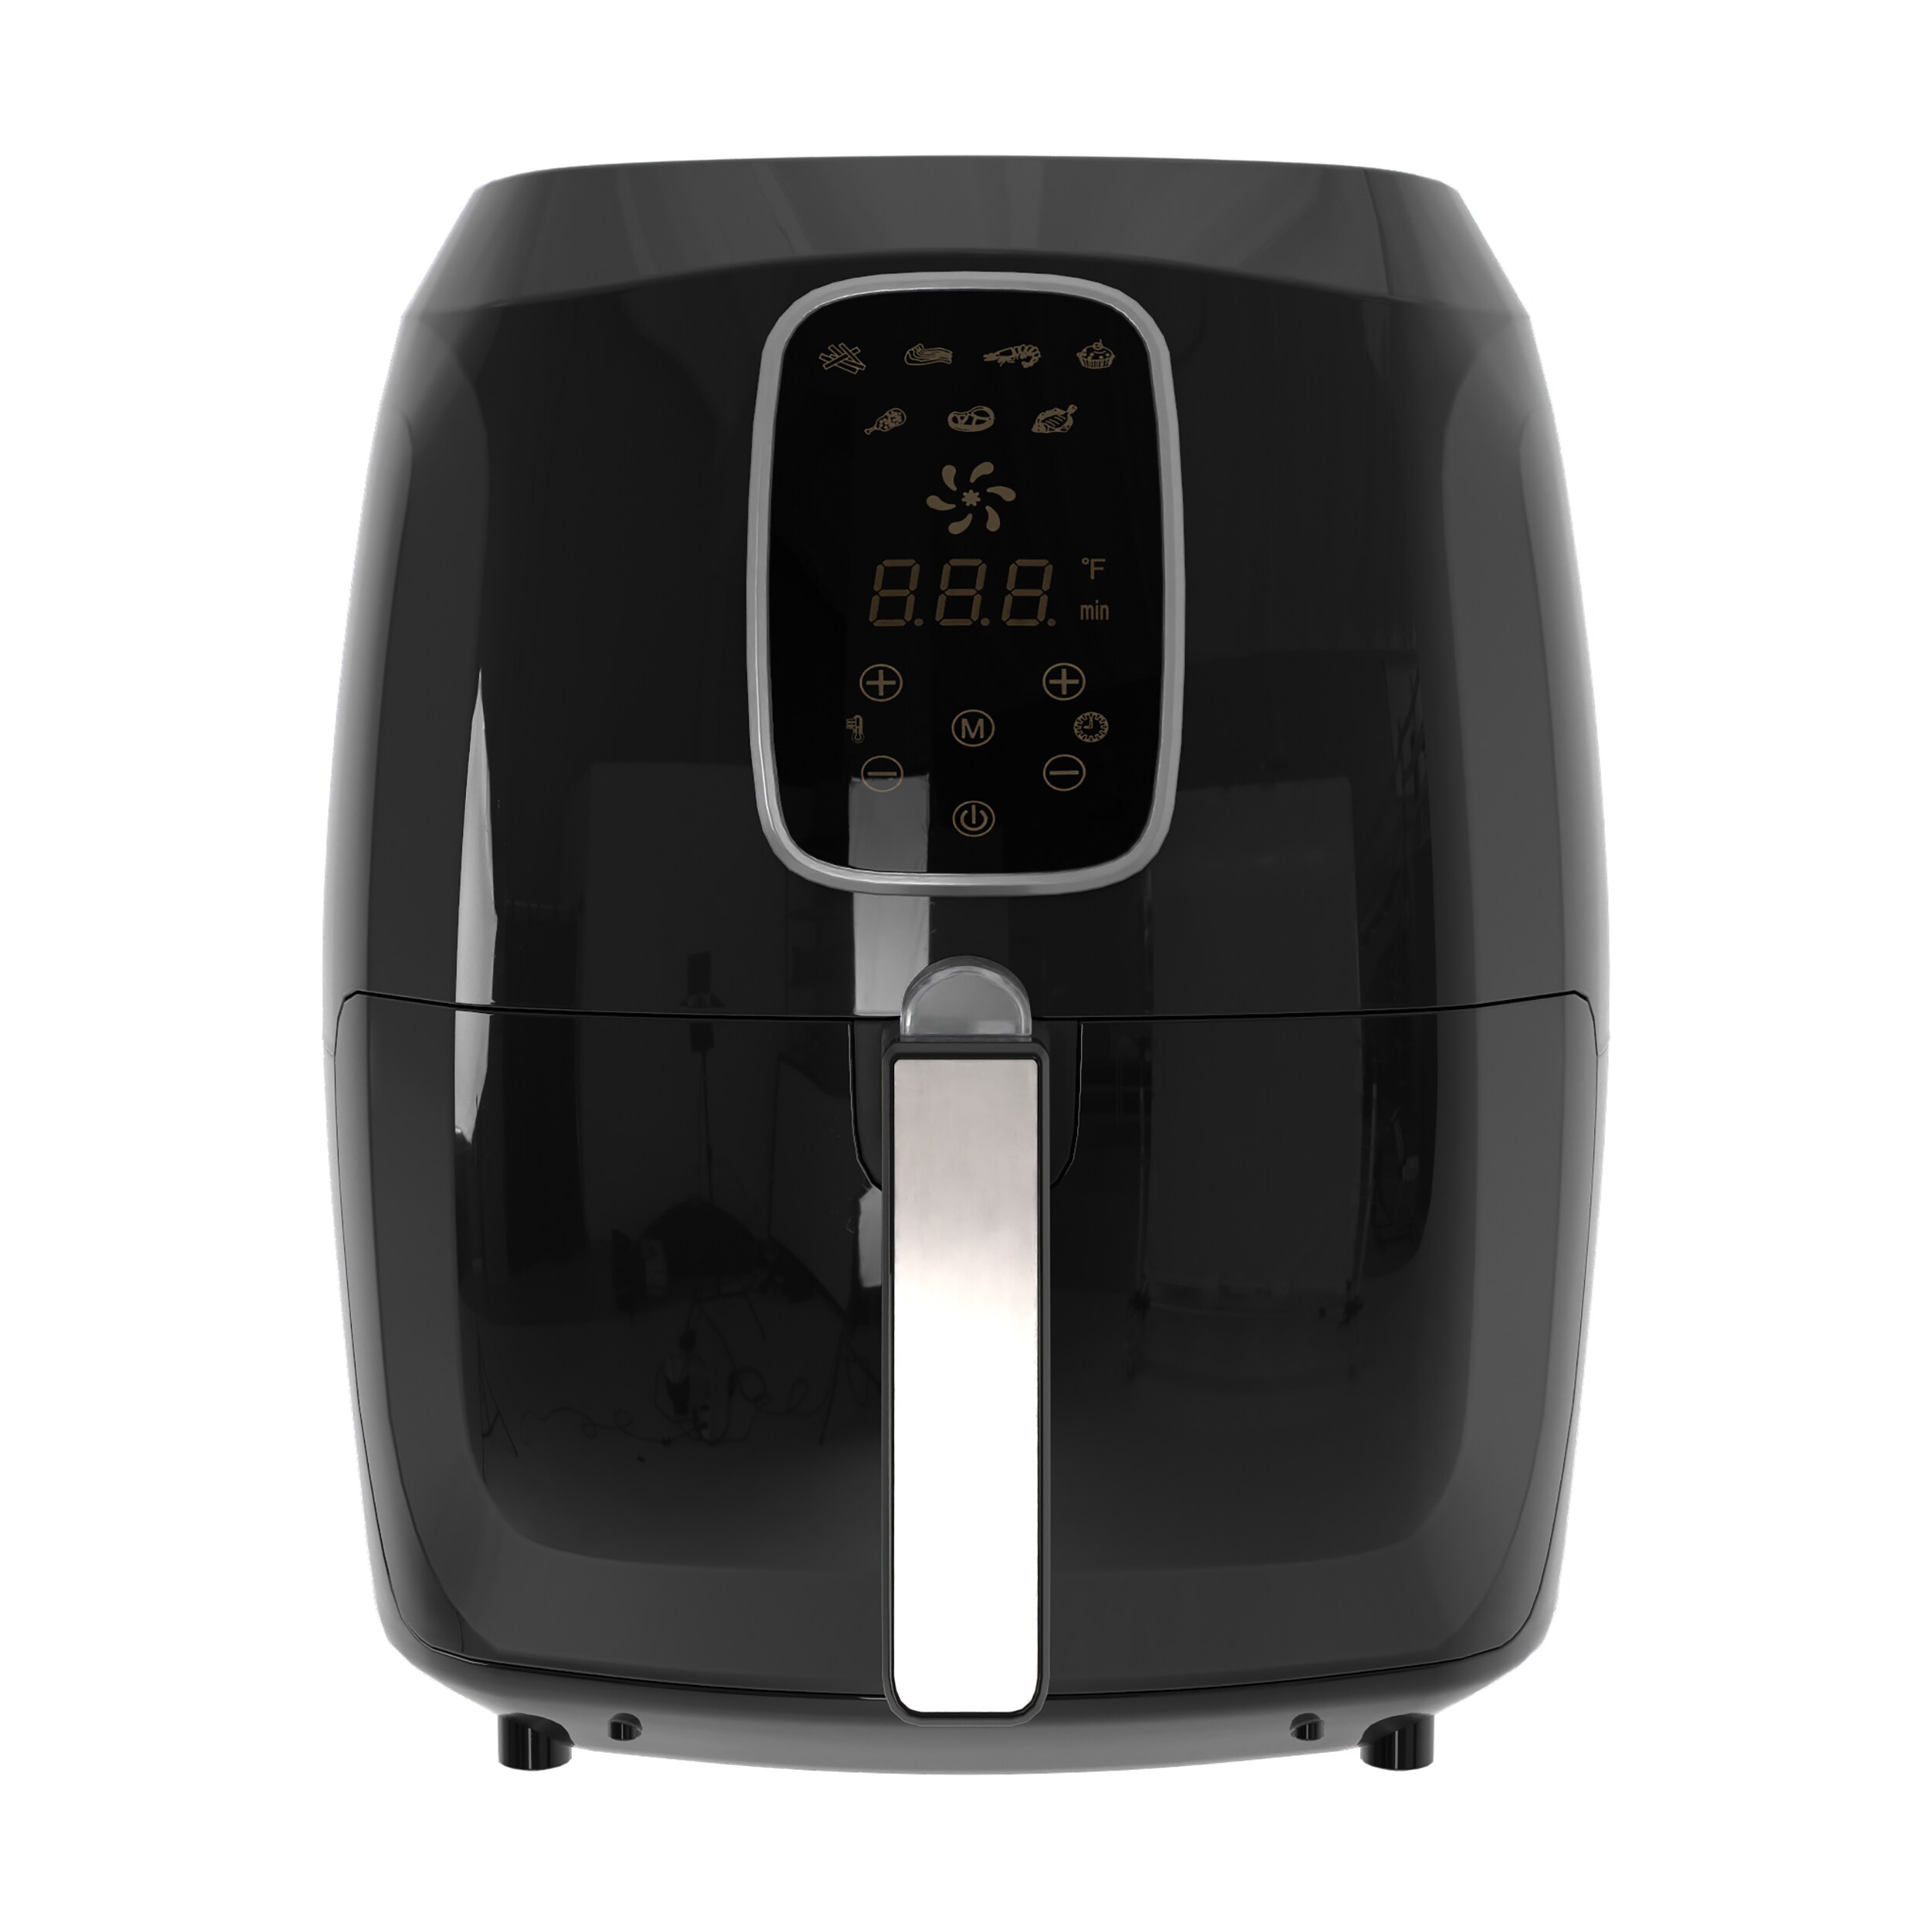 Up To 55% Off on Emerald Digital Air Fryers